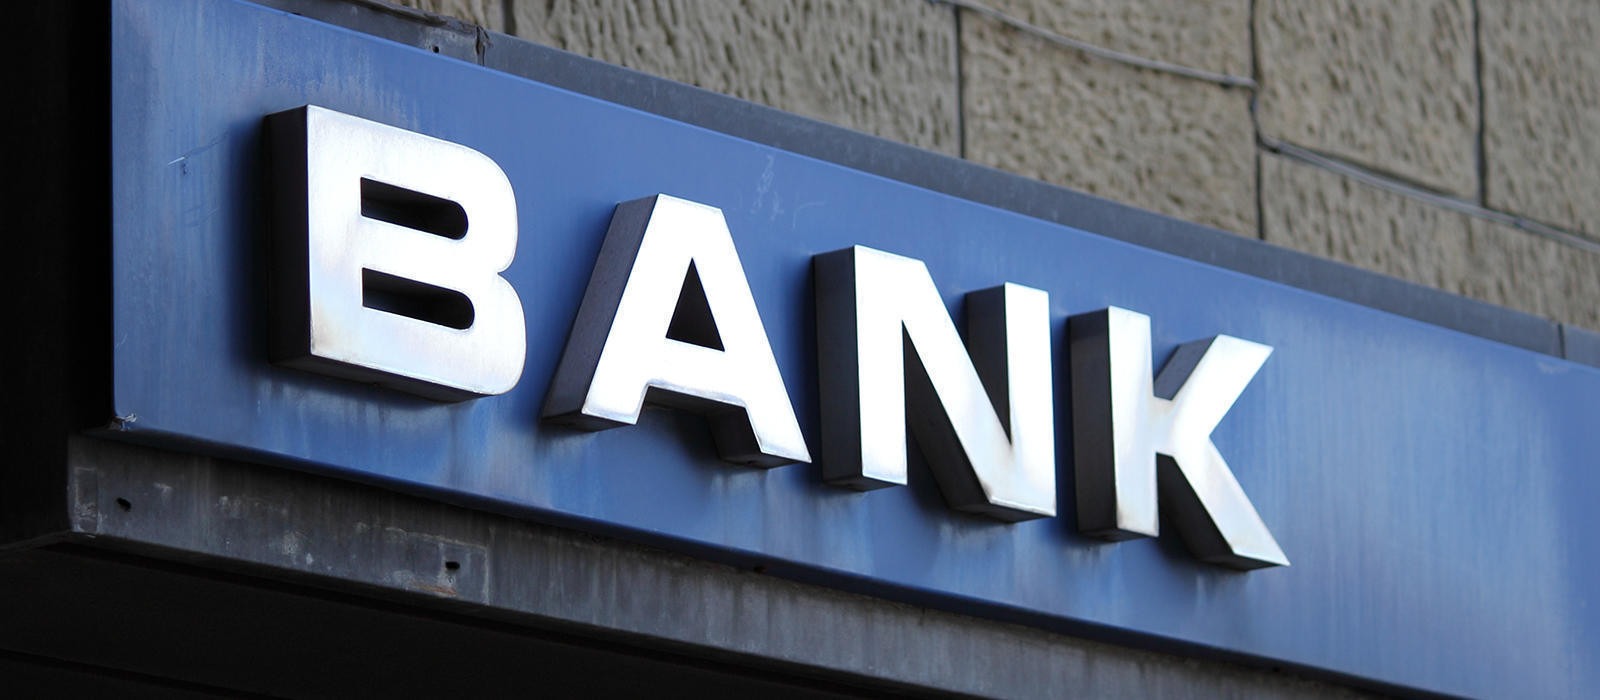 Editorial: The demise of bank employees